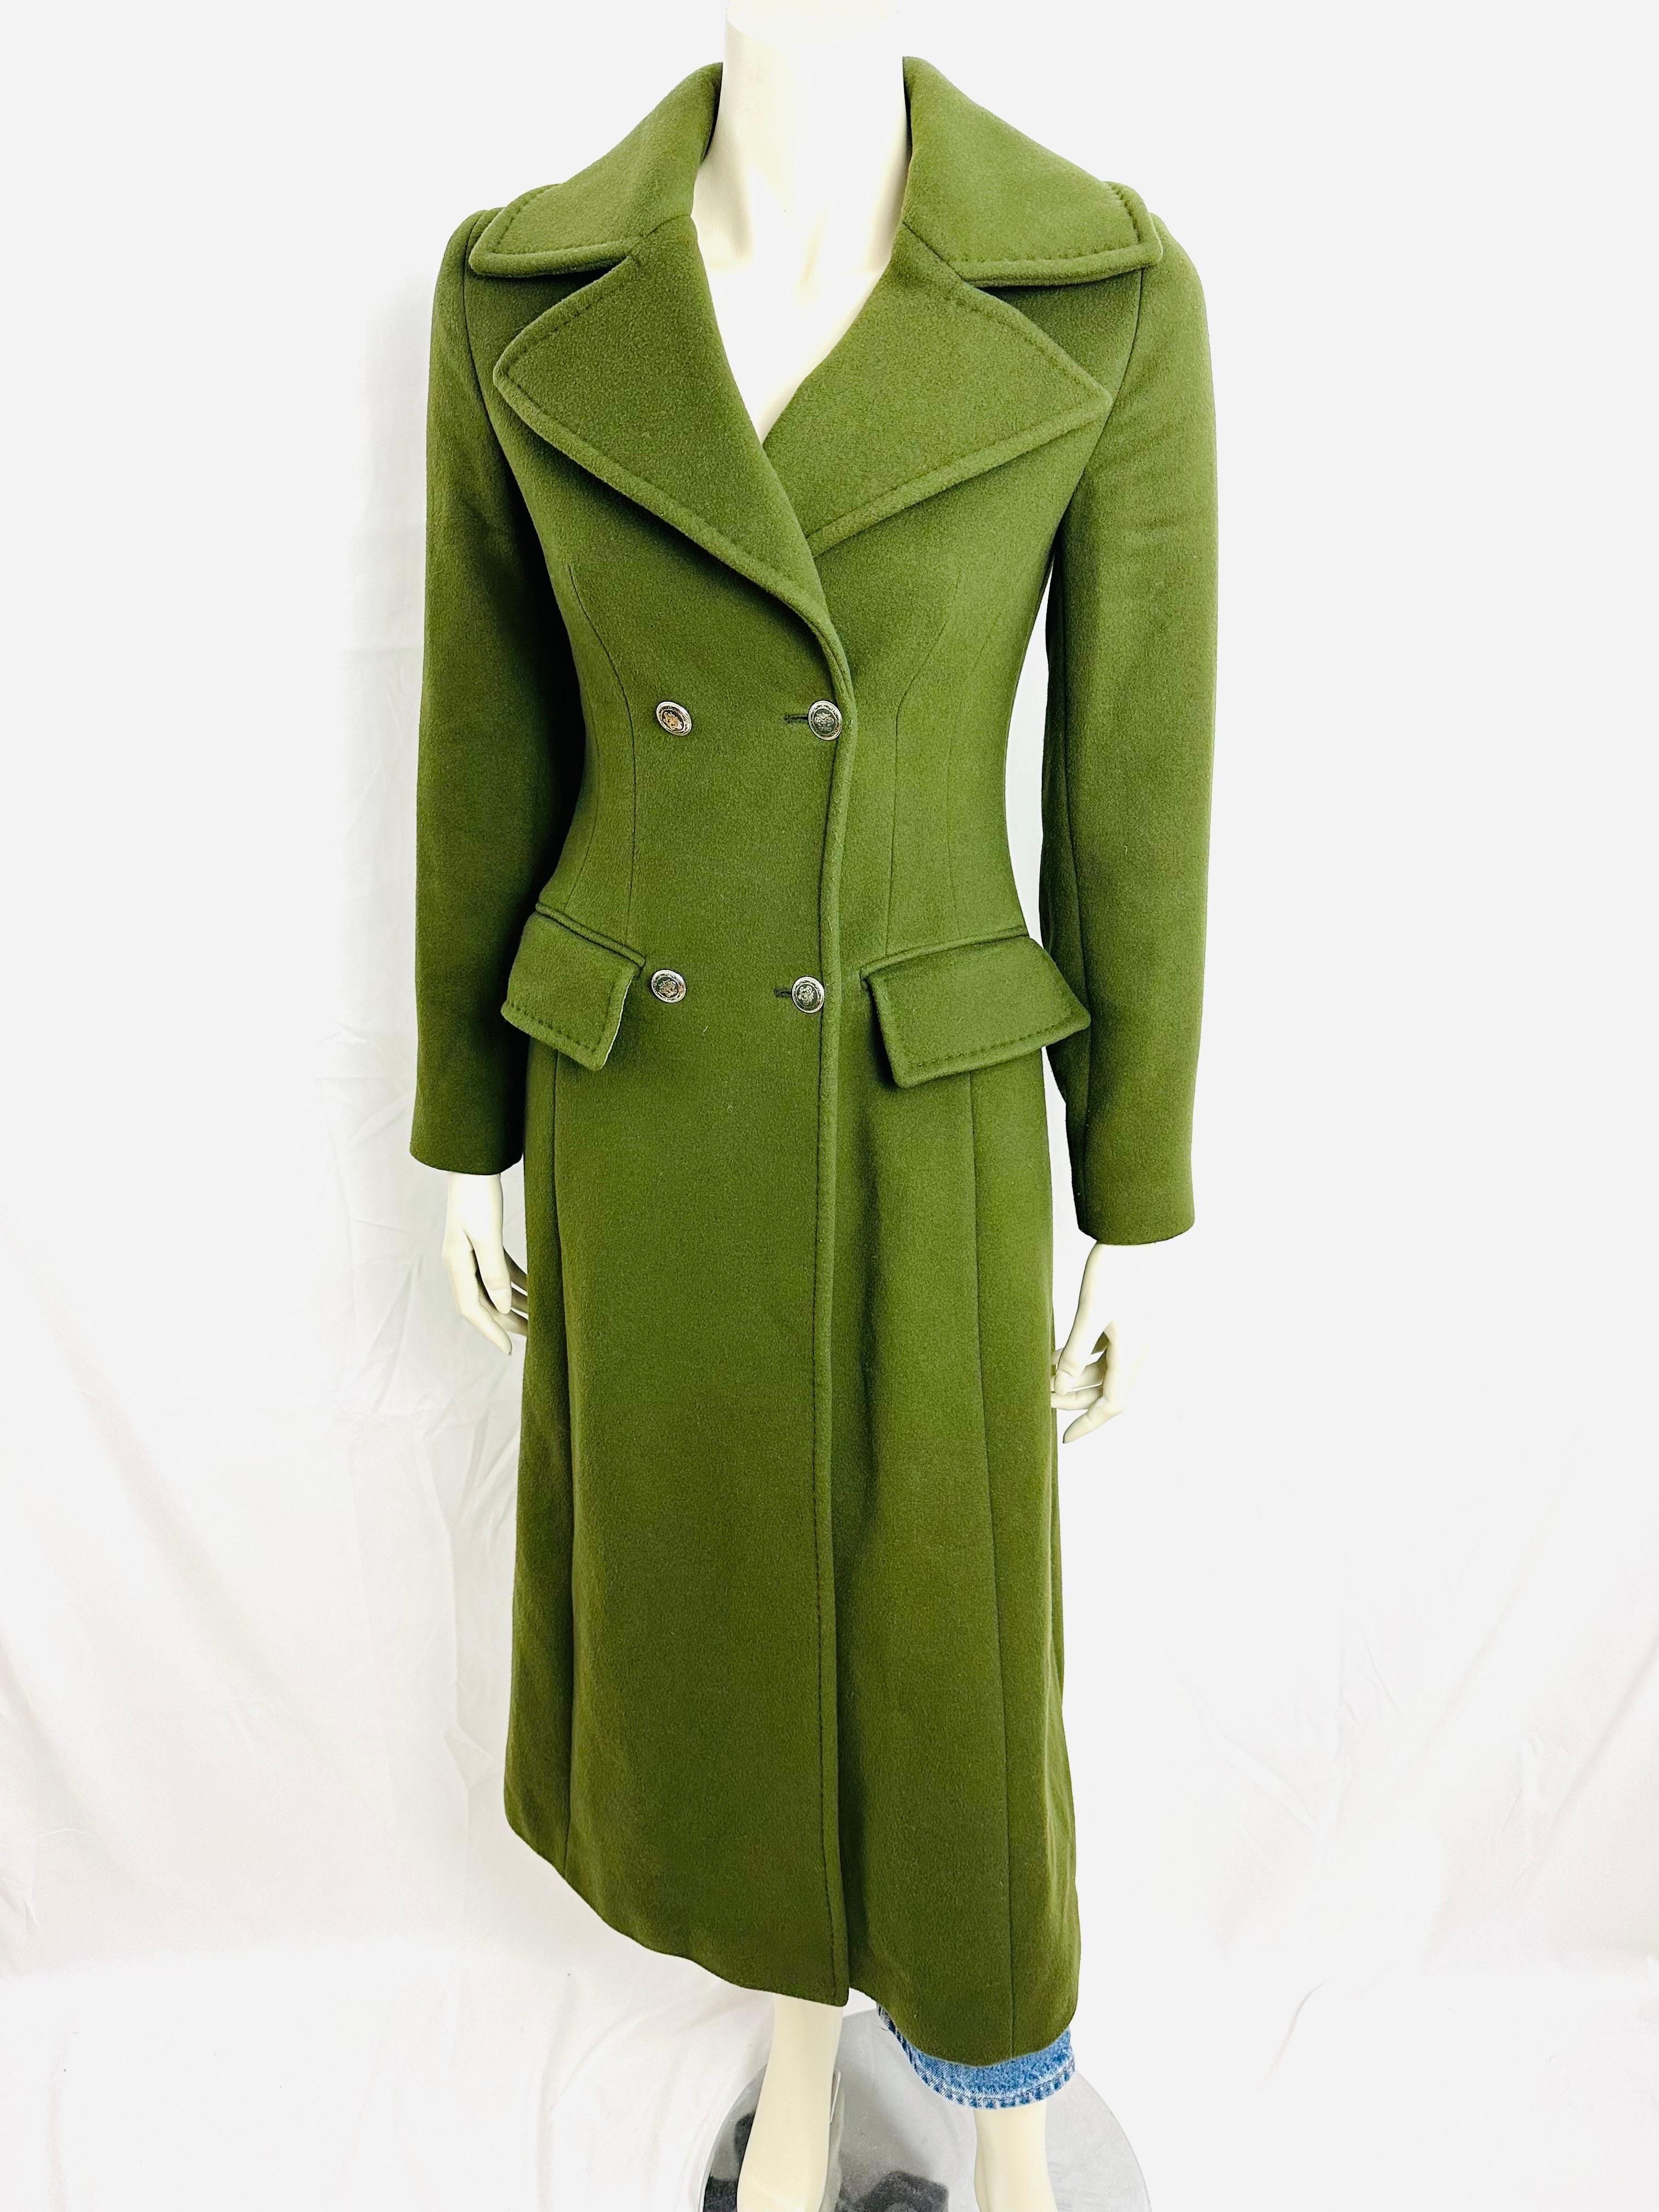 Khaki green wool coat Alberta Ferretti
Very long and fitted with
collars with pointed lapels, double-breasted buttoning
2 large flap pockets
Narrow sleeves with buttoned cuffs.
Slit at back of coat
Fully lined with brown viscose fabric.
Size 36,